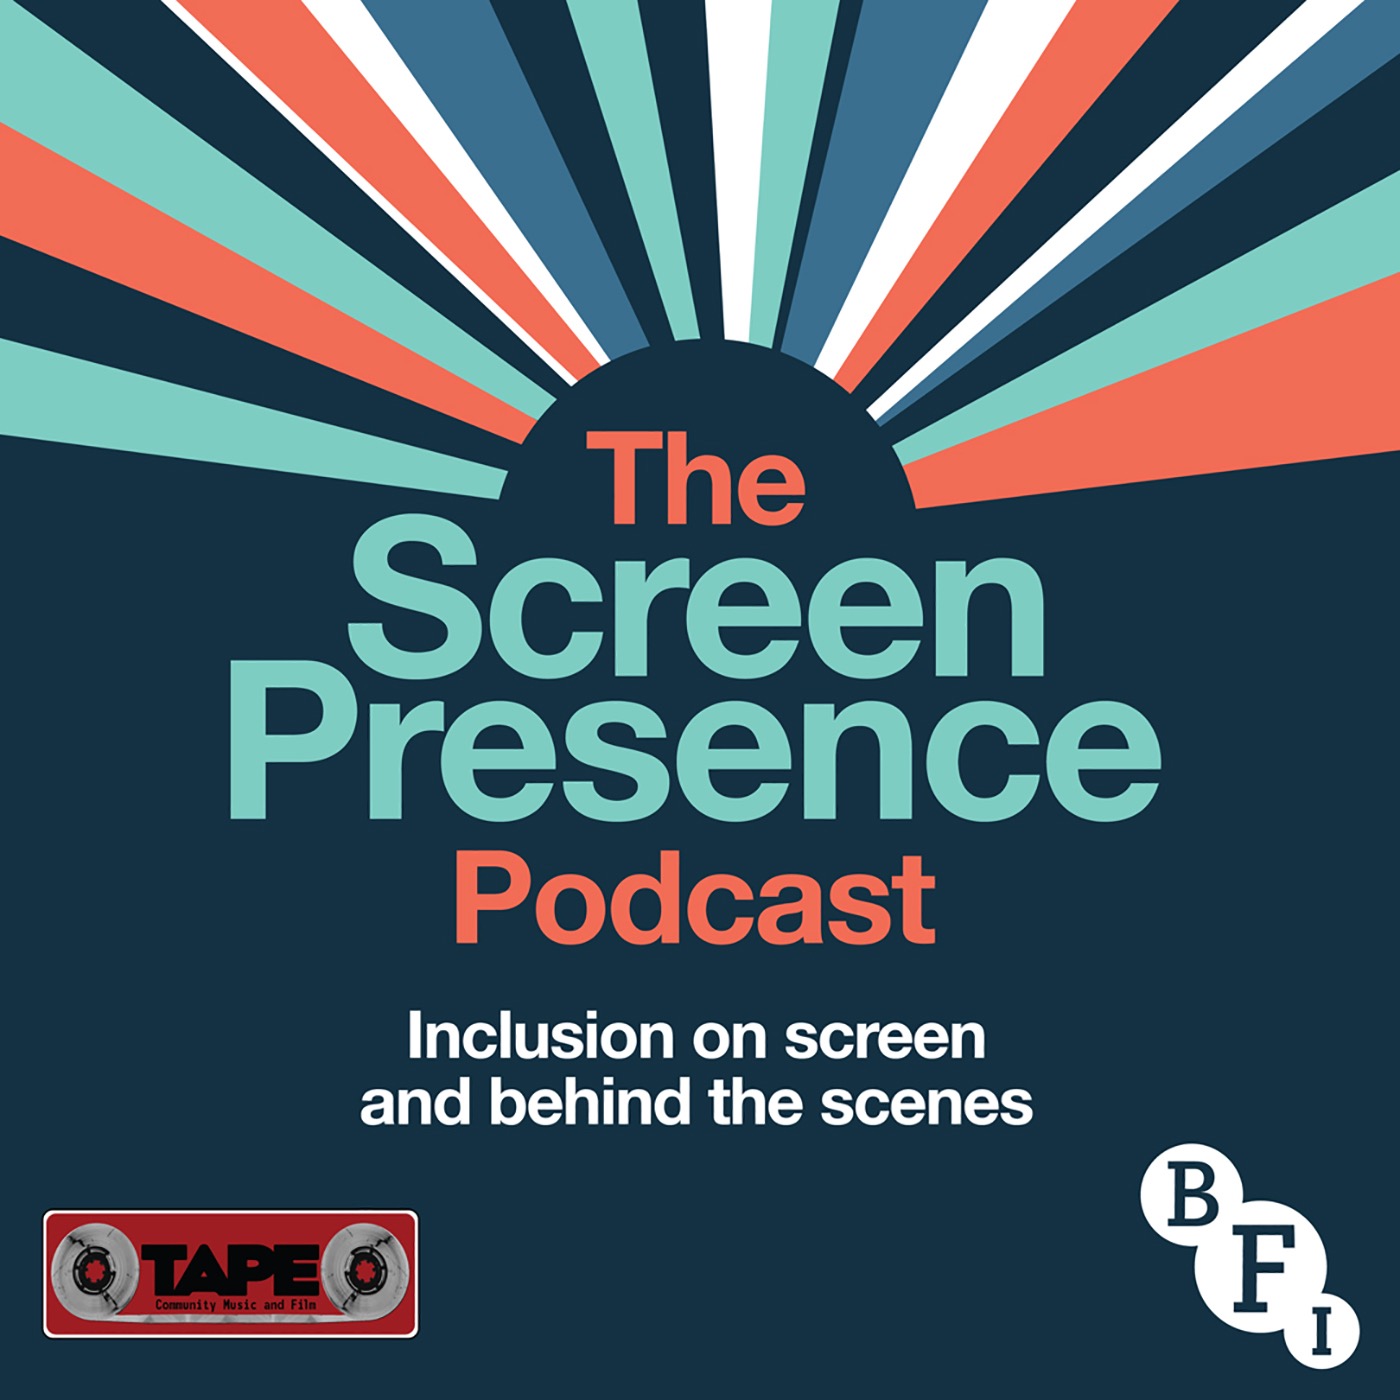 The Screen Presence Podcast: Episode #6 Mental Health (part 2)